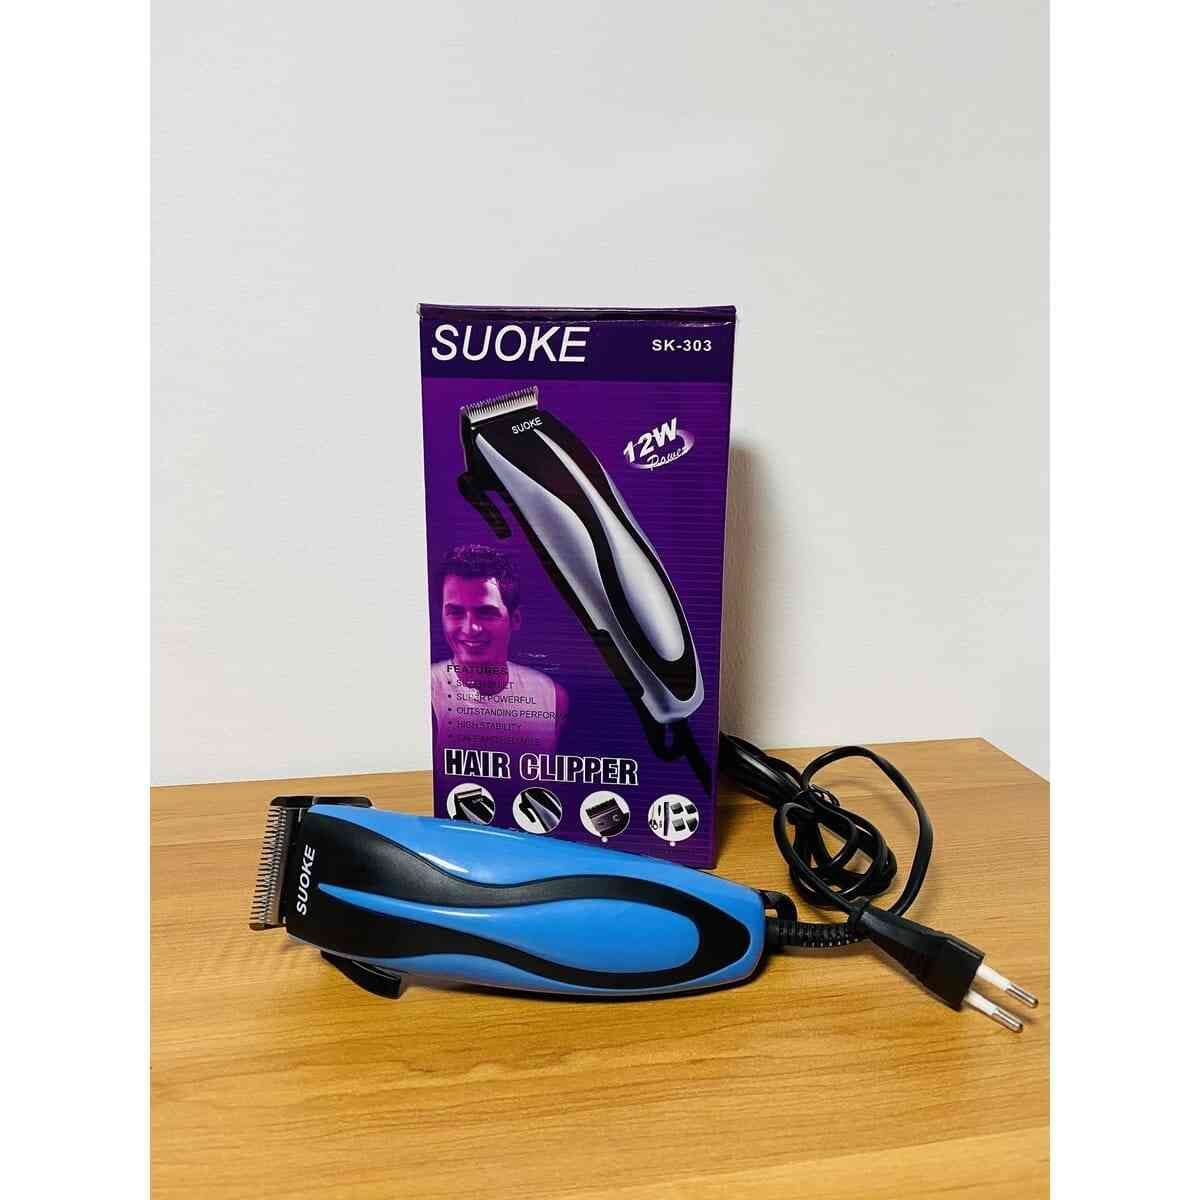 SUOKE 303 PROFESSIONAL HAIR CLIPPER / TRIMMER Buy Online at Best Prices in SriLanka | ido.lk